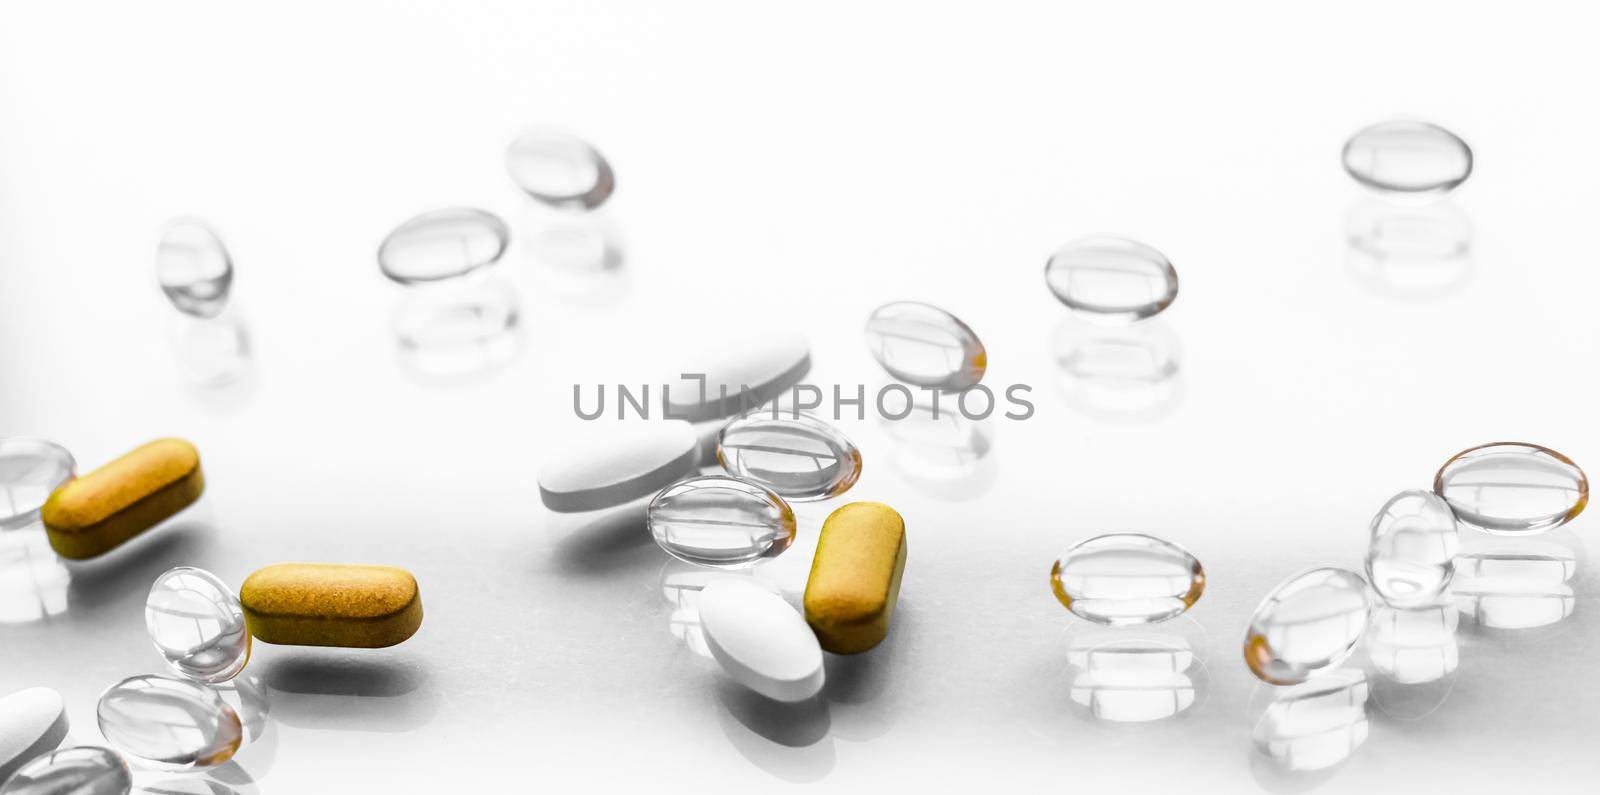 Pharma, branding and lab concept - Pills and capsules for diet nutrition, anti-aging beauty supplements, probiotic drugs, pill vitamins as medicine and healthcare cosmetics, pharmacy brand background